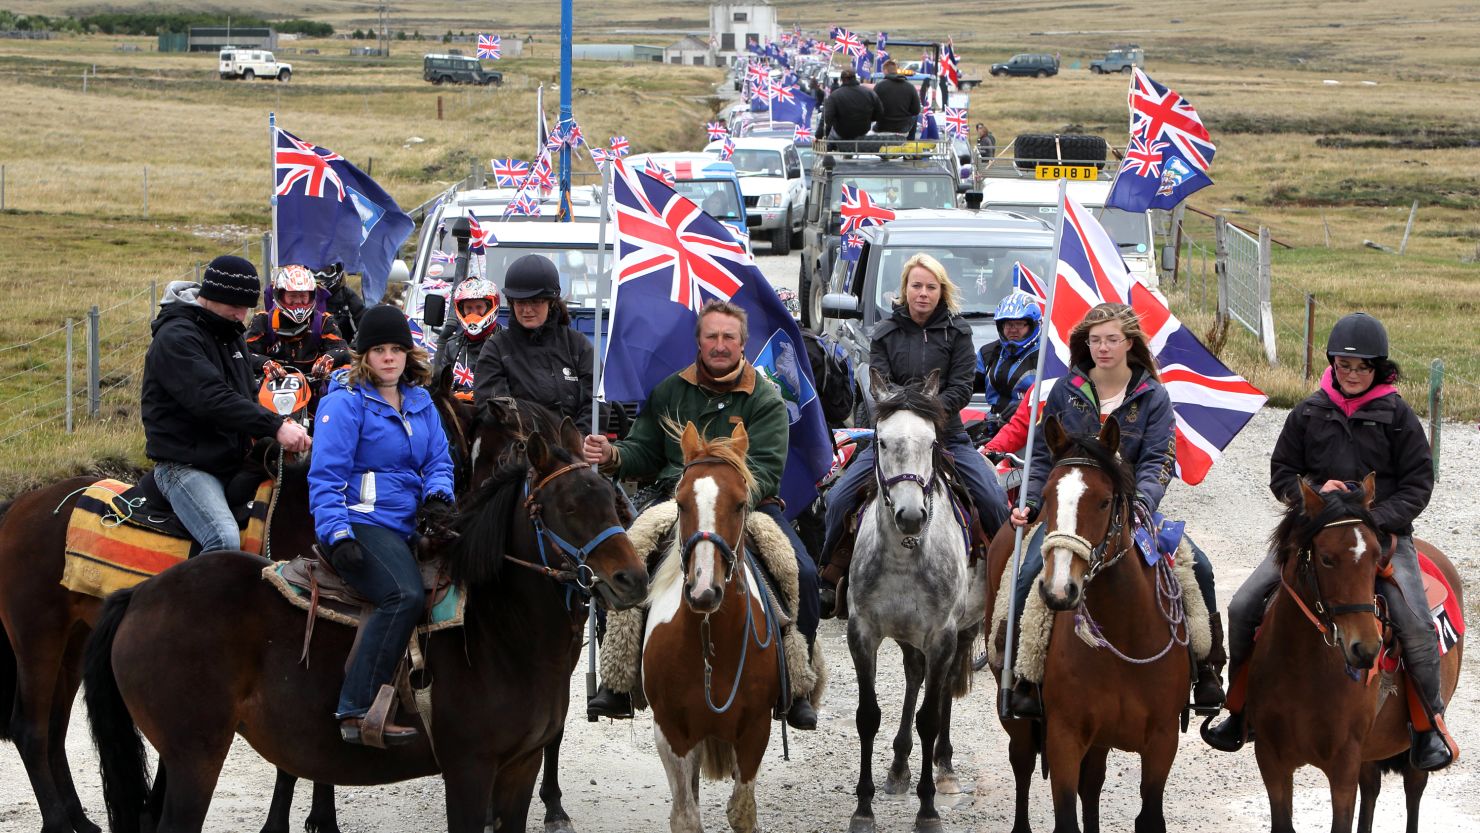 Falkland Islanders take part in the "Proud to be British" parade along Ross Road in Port Stanley on March 10.  